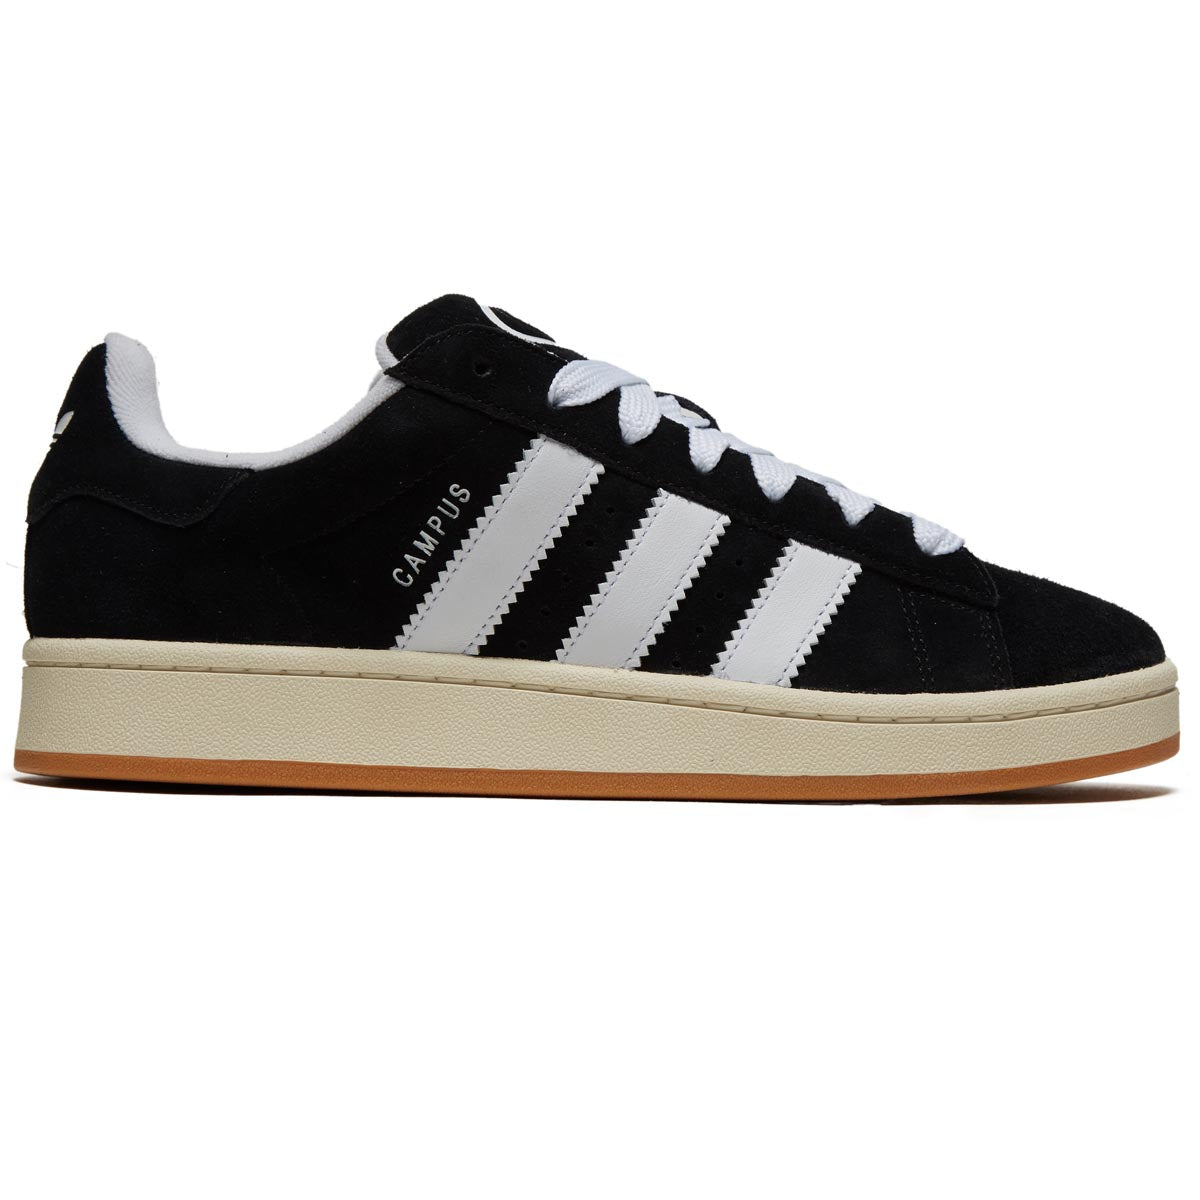 Adidas Campus 00s Shoes - Core Black/Ftwr White/Off White image 1